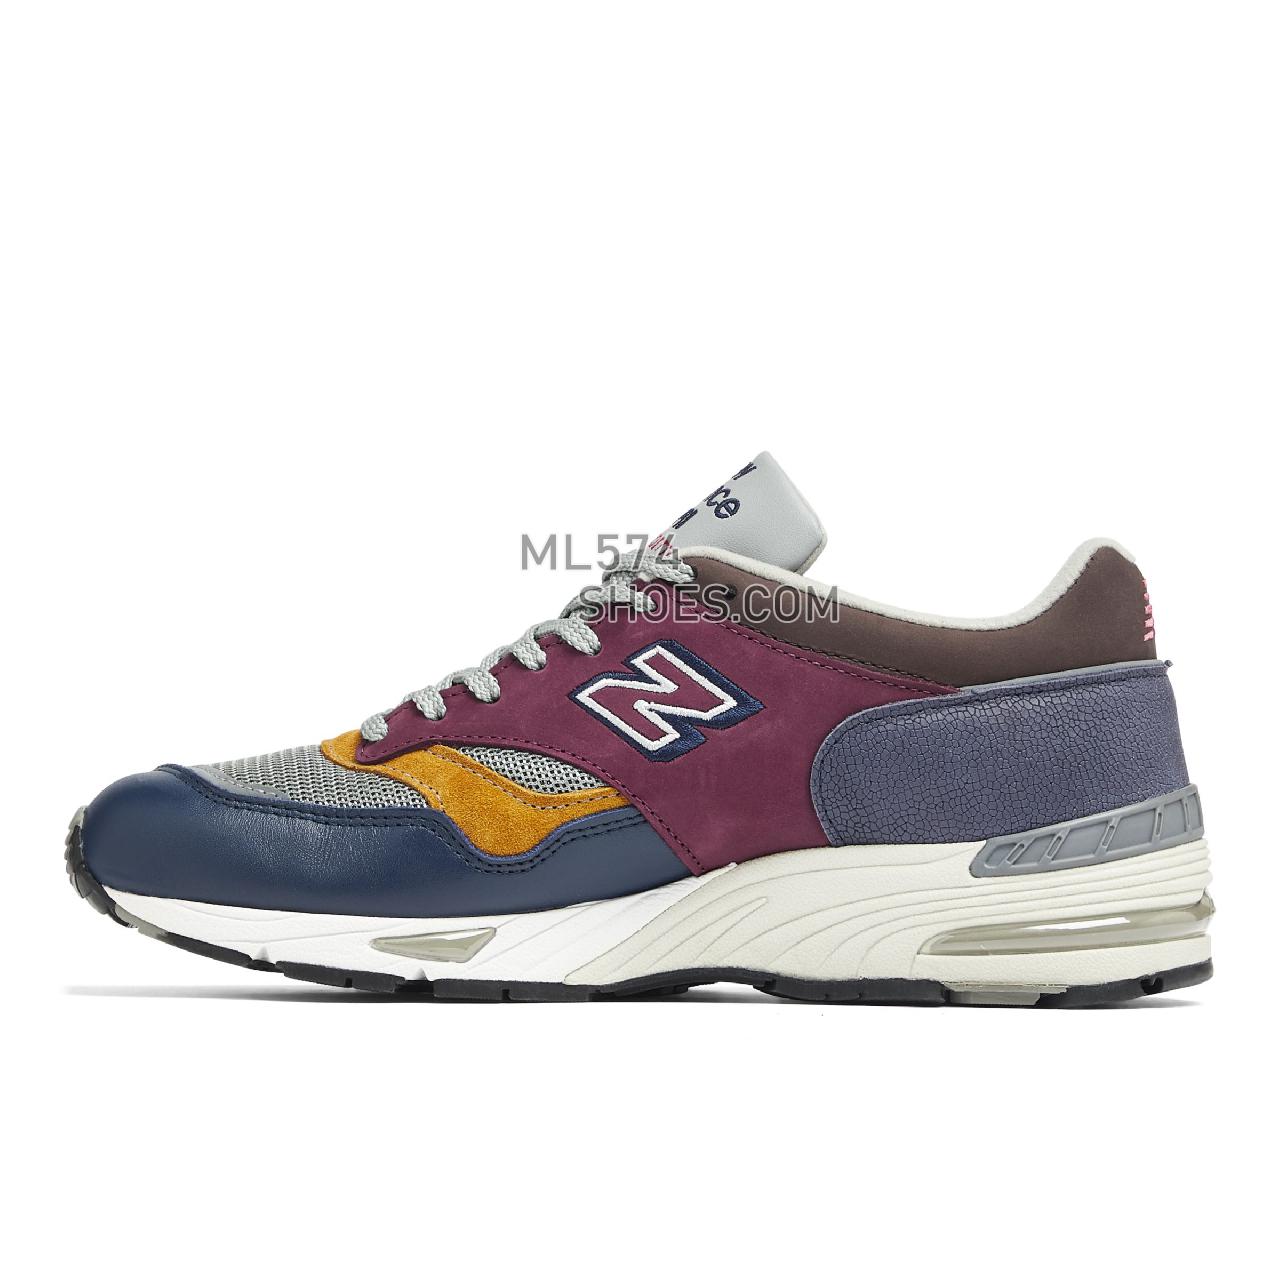 New Balance MADE UK 1591 - Men's Made in USA And UK Sneakers - Navy with grey and purple - M1591SPK